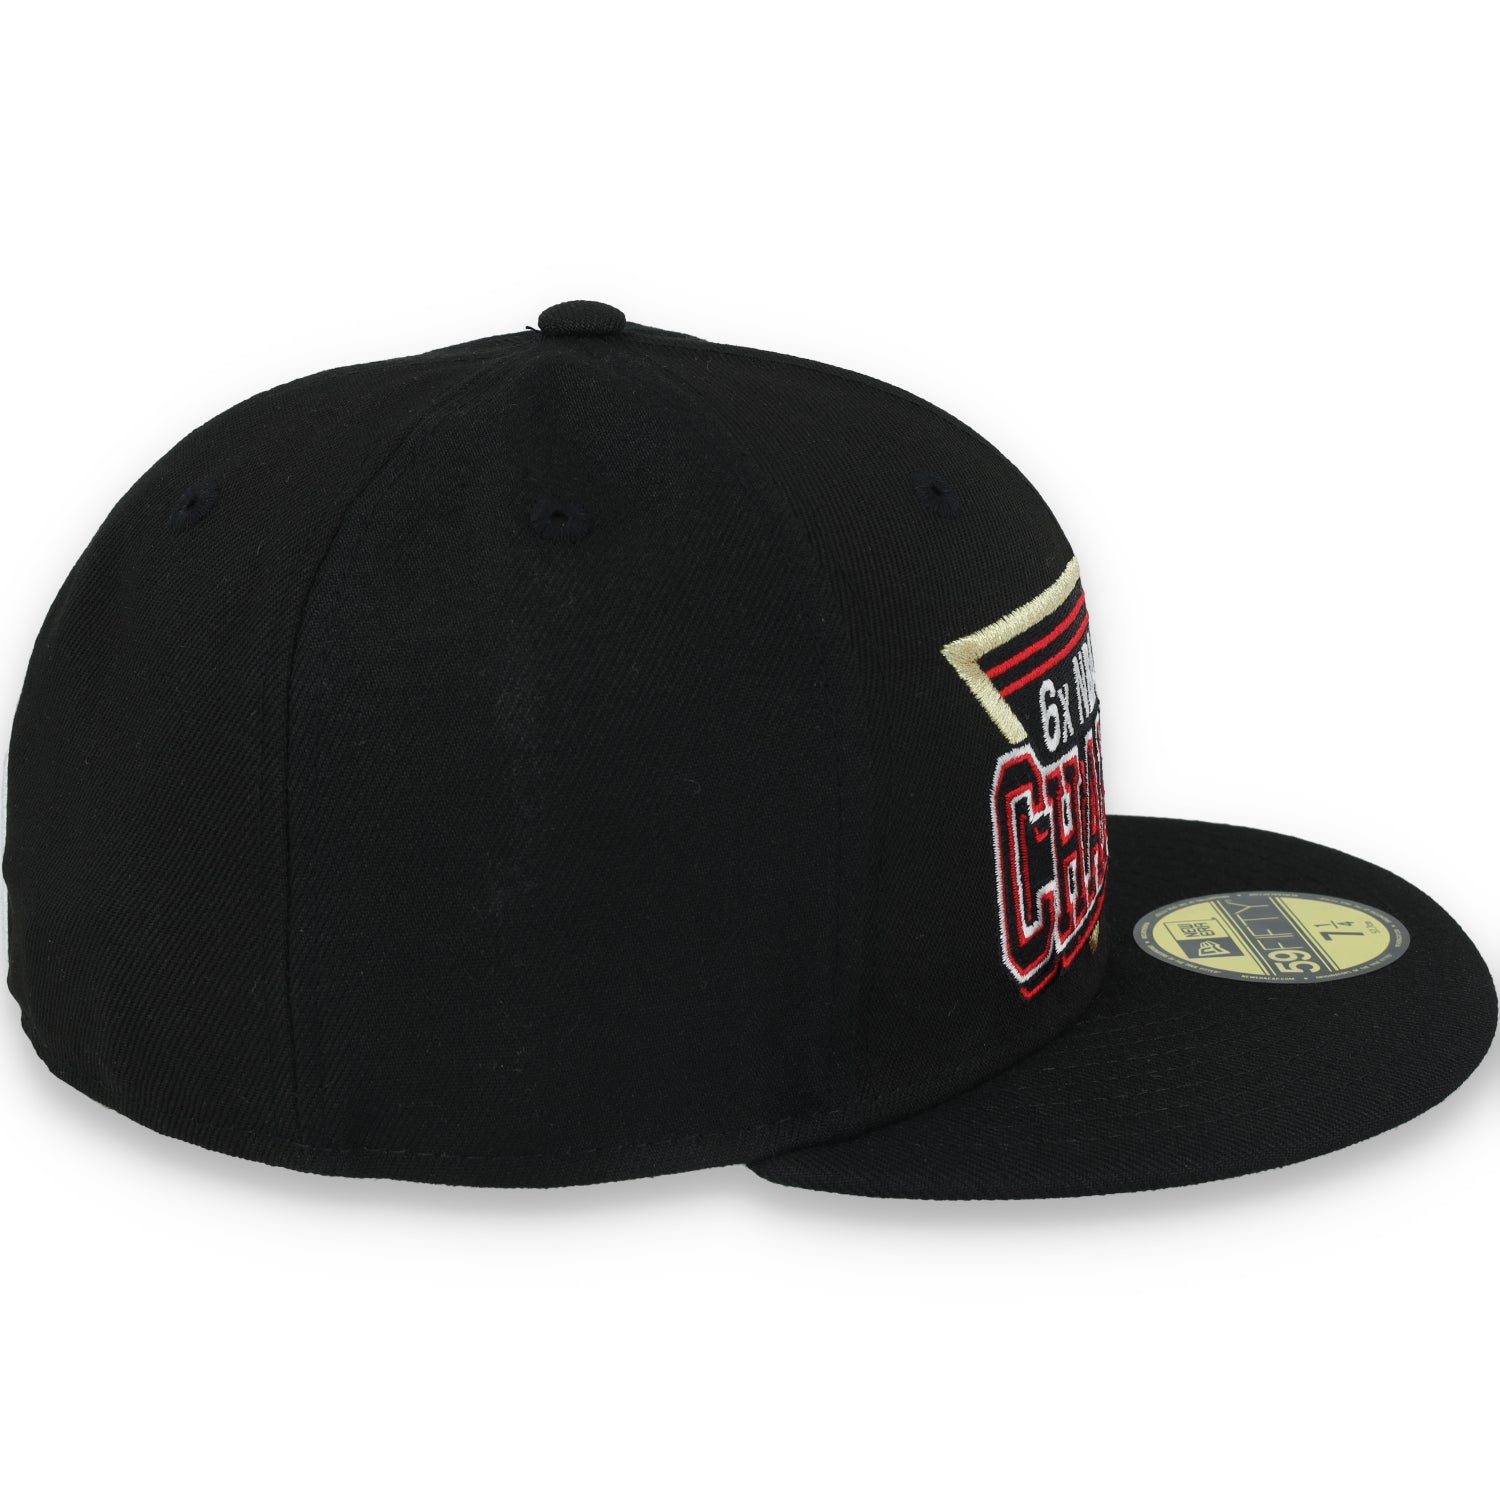 New Era Chicago Bulls 6X Champions Throwback 59FIFTY Fitted Hat